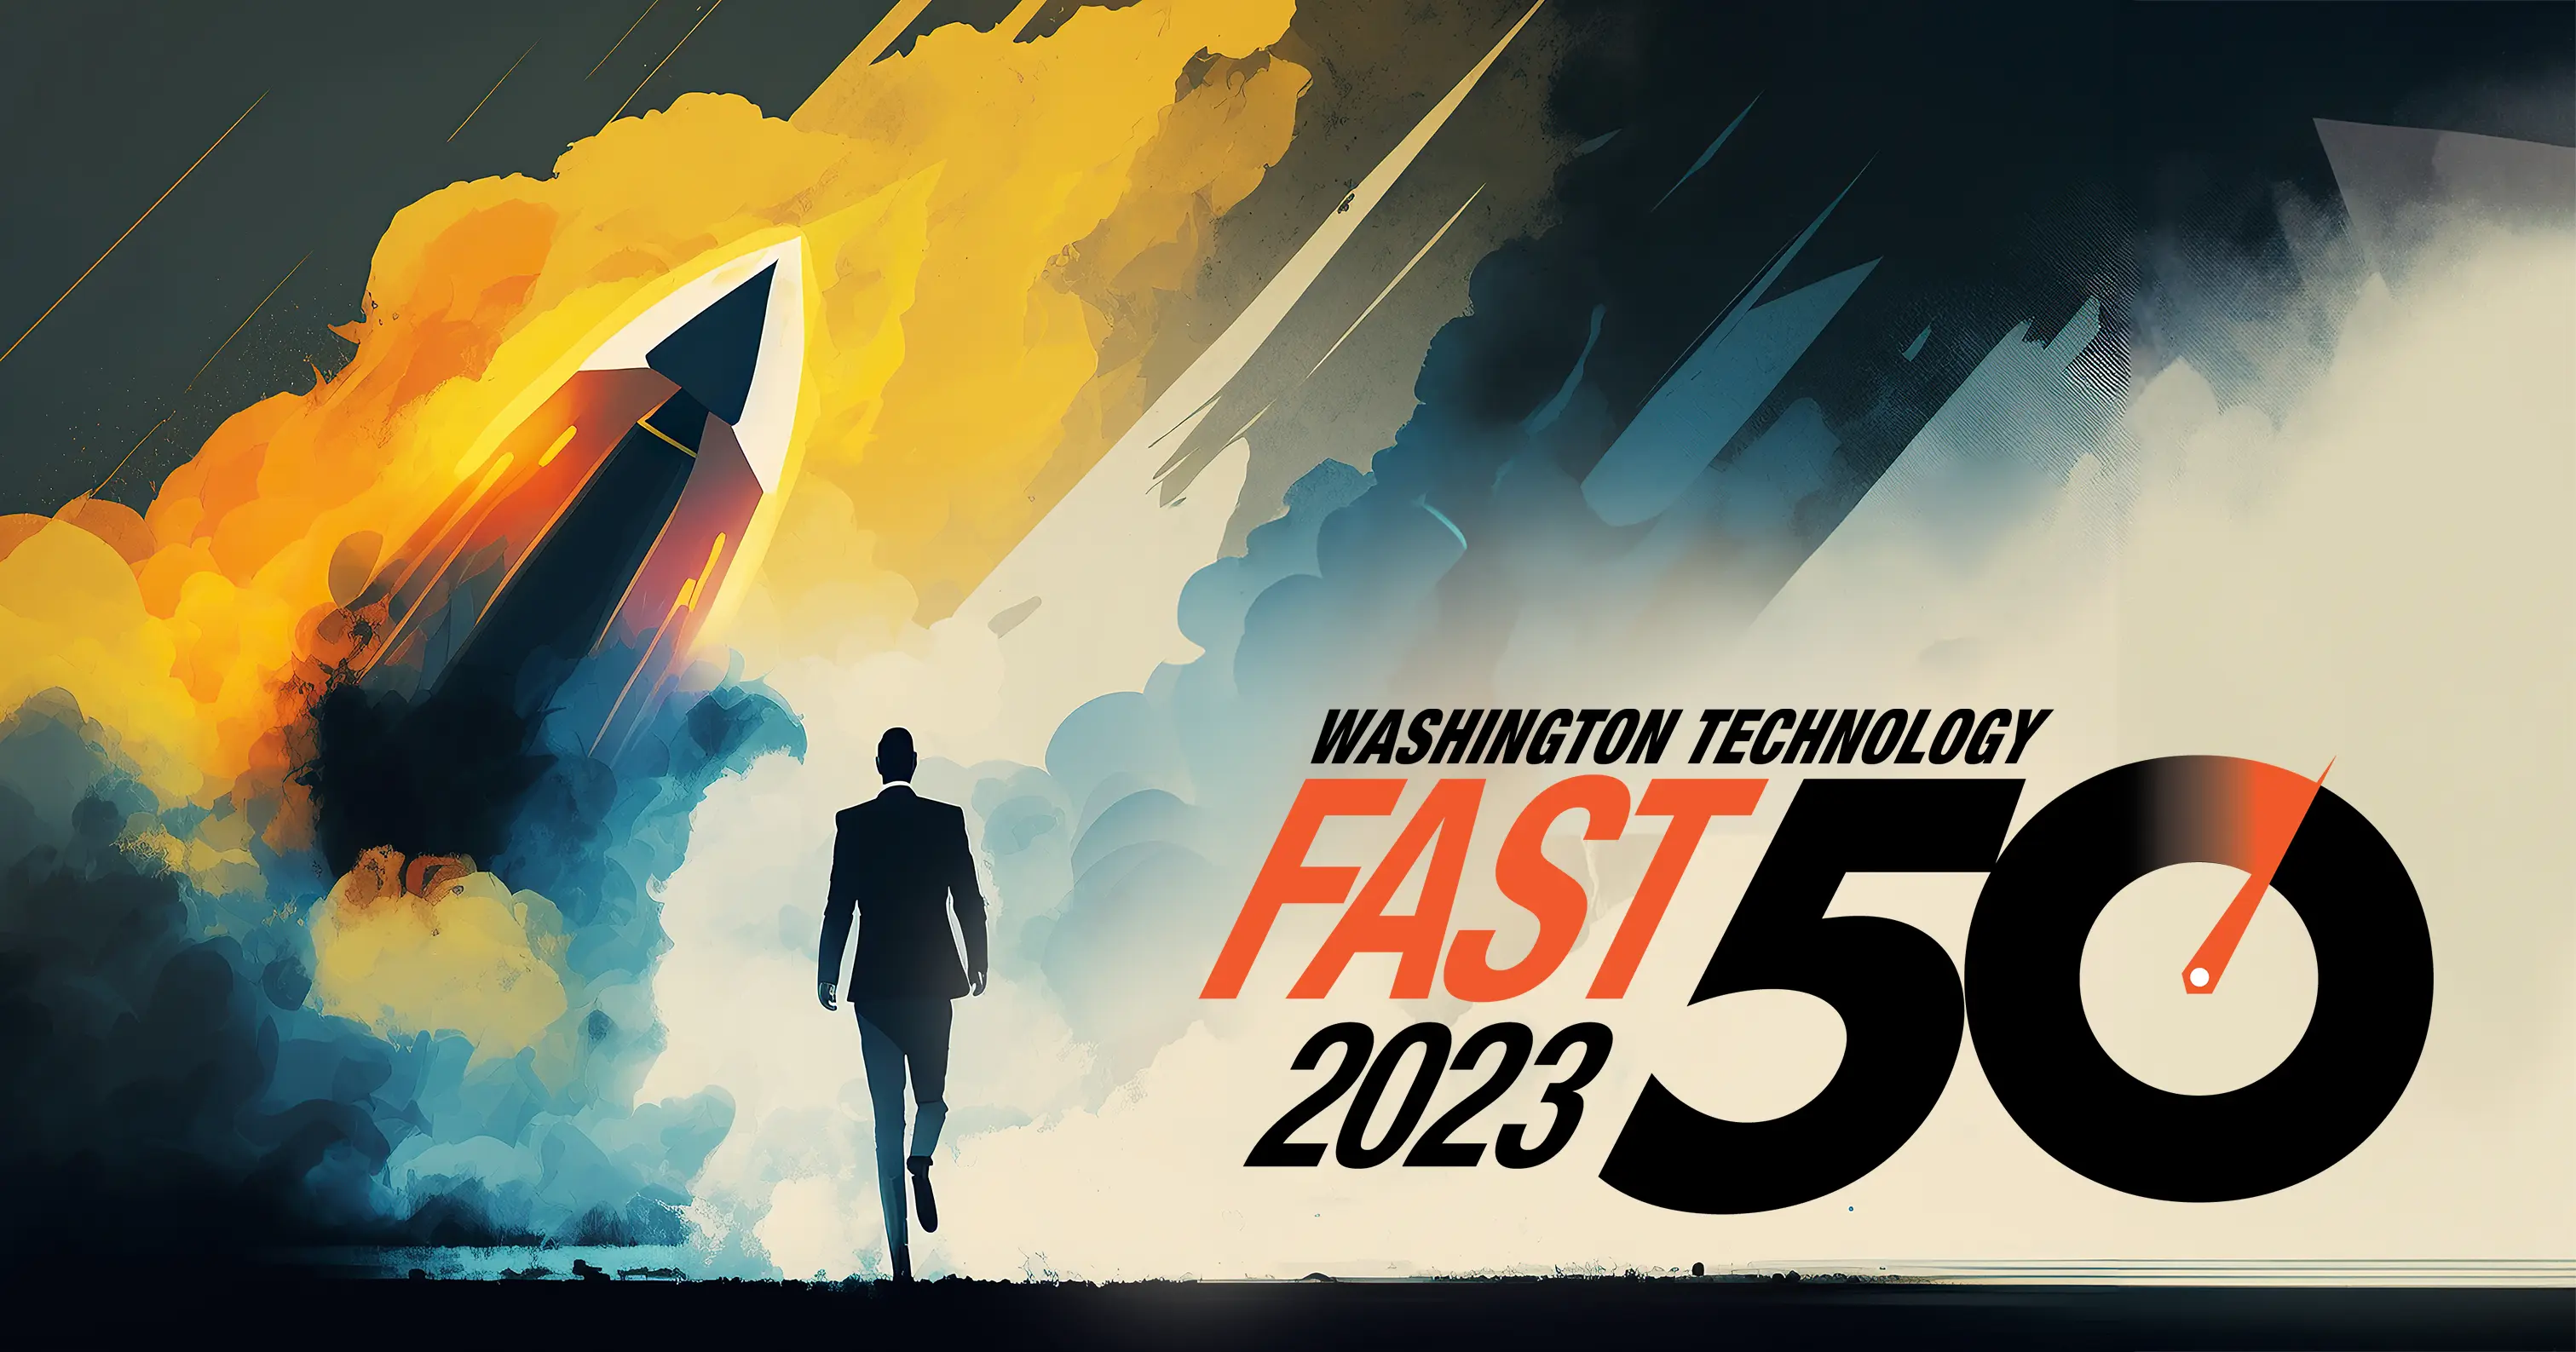 BrainGu Ranks 19th on Washington Technology Fast 50 List, Showcasing Exponential Growth and Technical Prowess